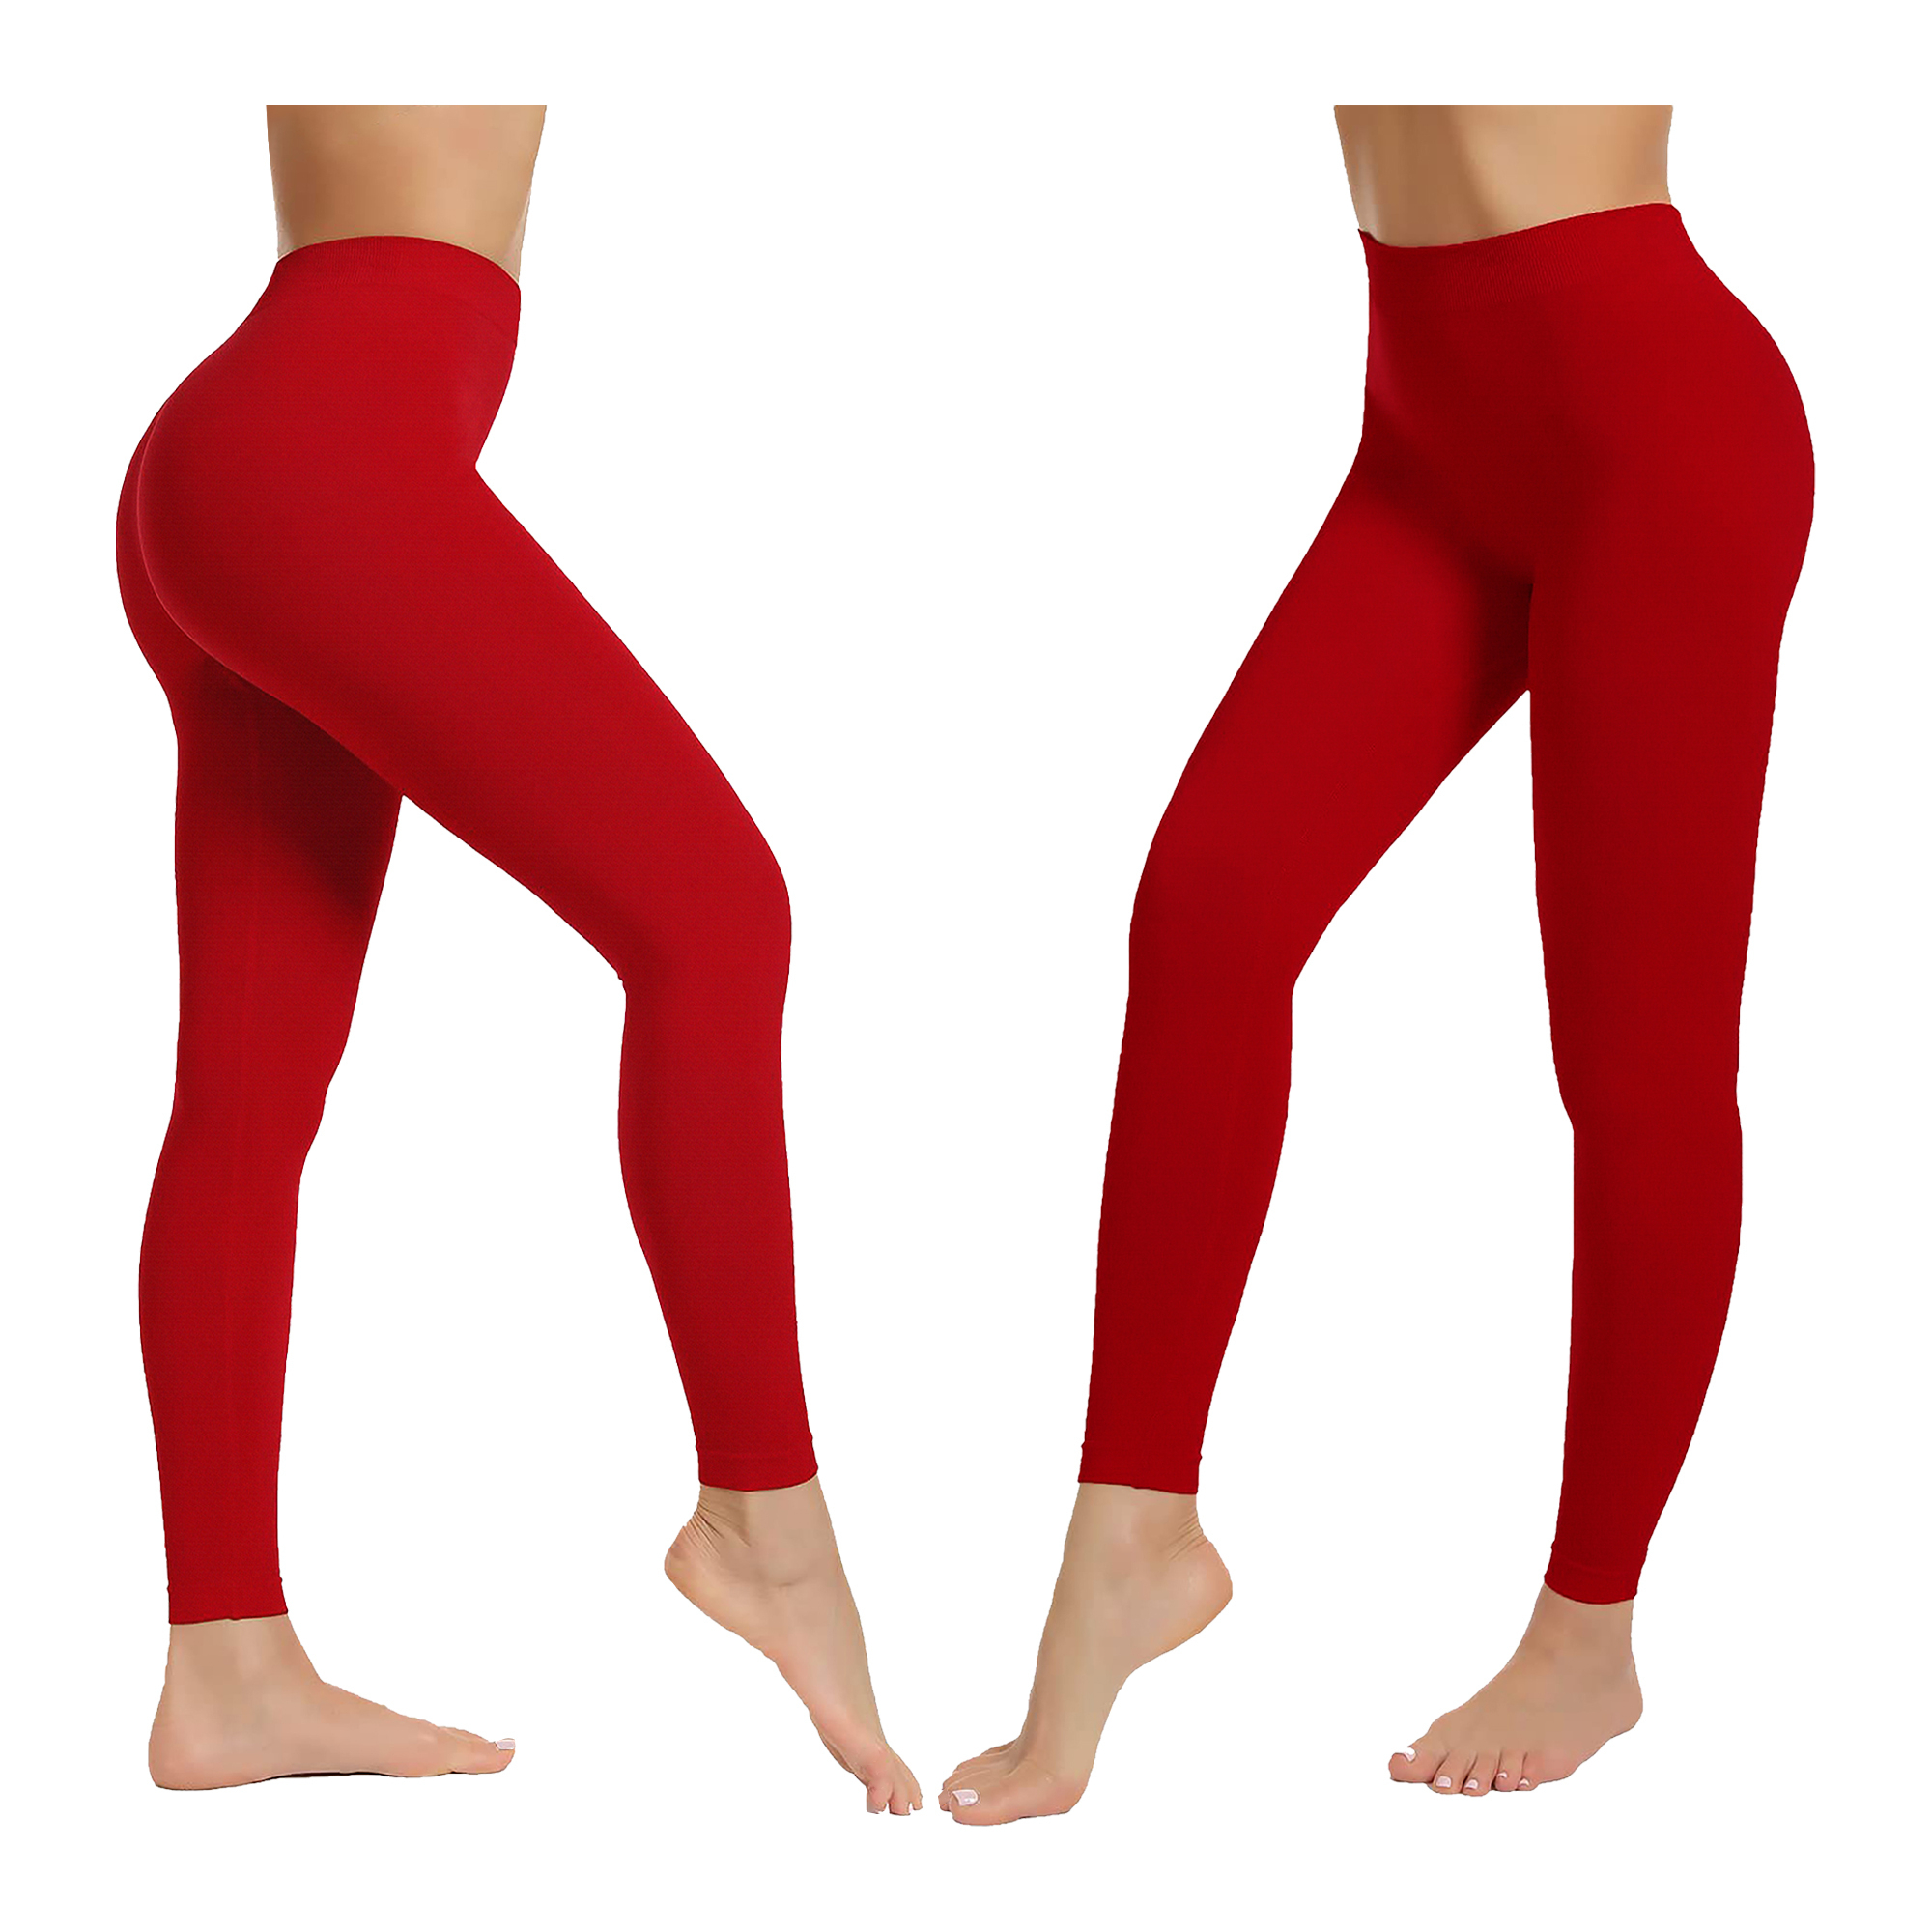 3-Pack: Women's High-Waist Ultra-Soft Stretchy Solid Fitness Yoga Leggings Pants - RED, L